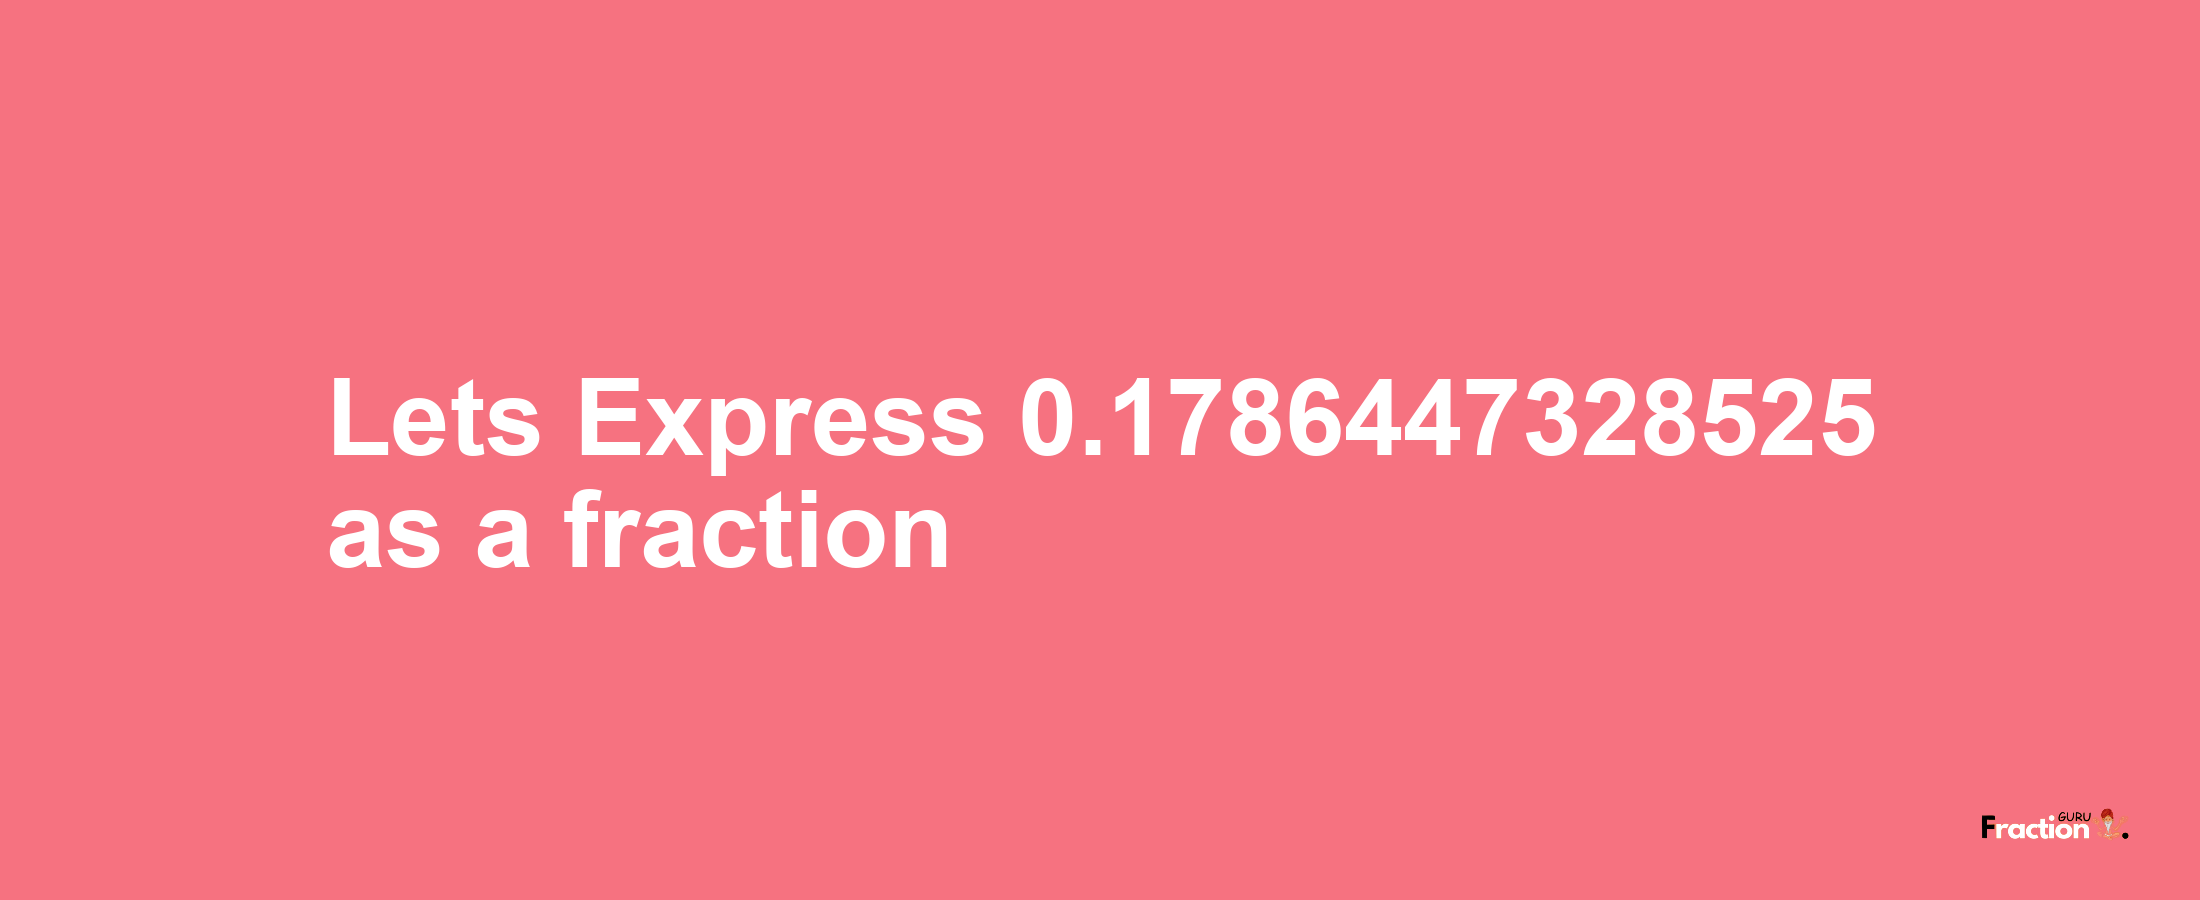 Lets Express 0.1786447328525 as afraction